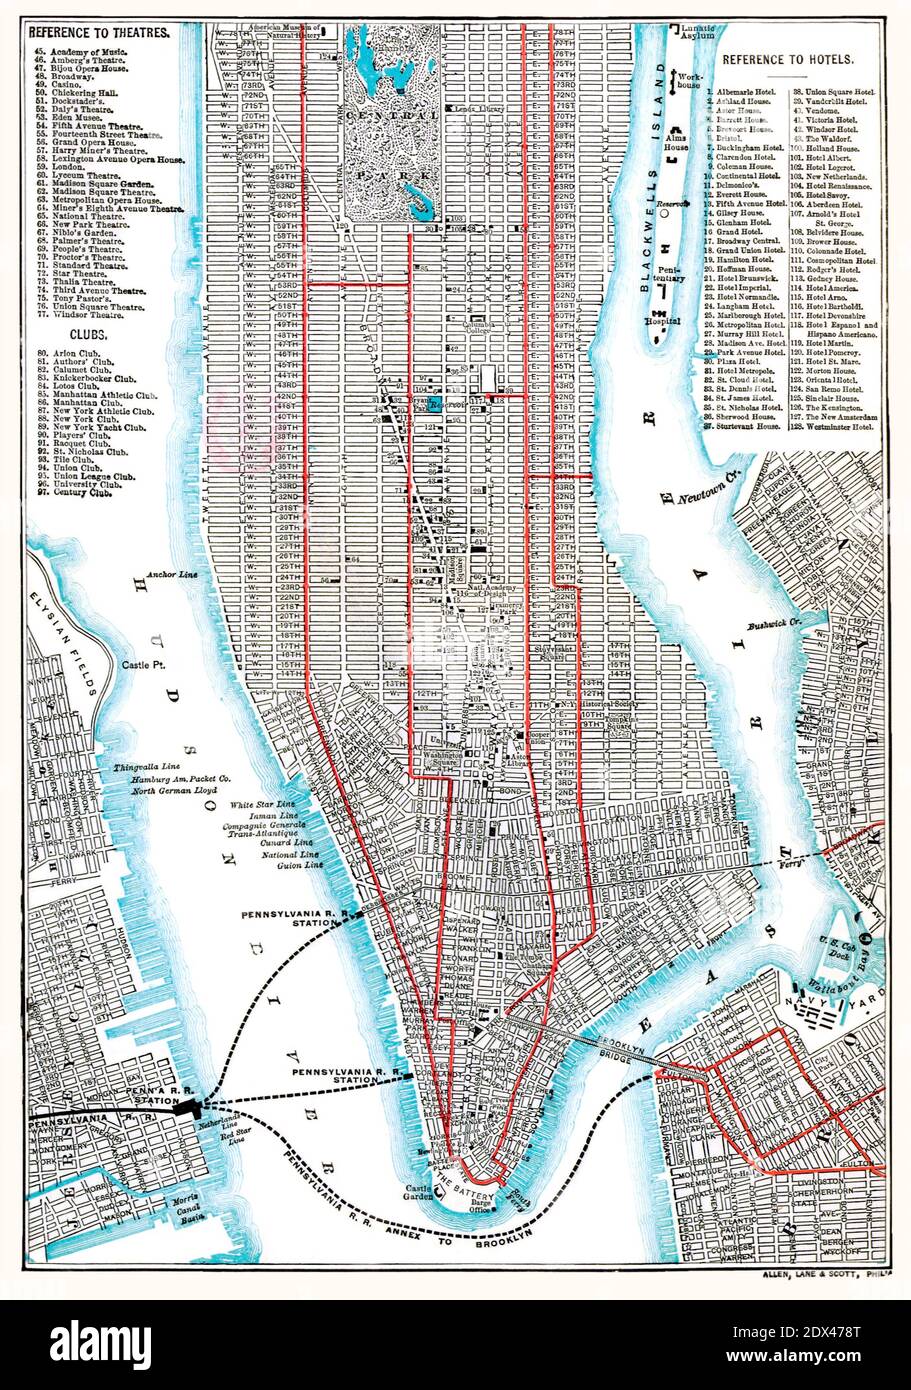 New York City Points of Interest in 1892. New York City map shows railroads, theaters, hotels, and points of interest. Stock Photo